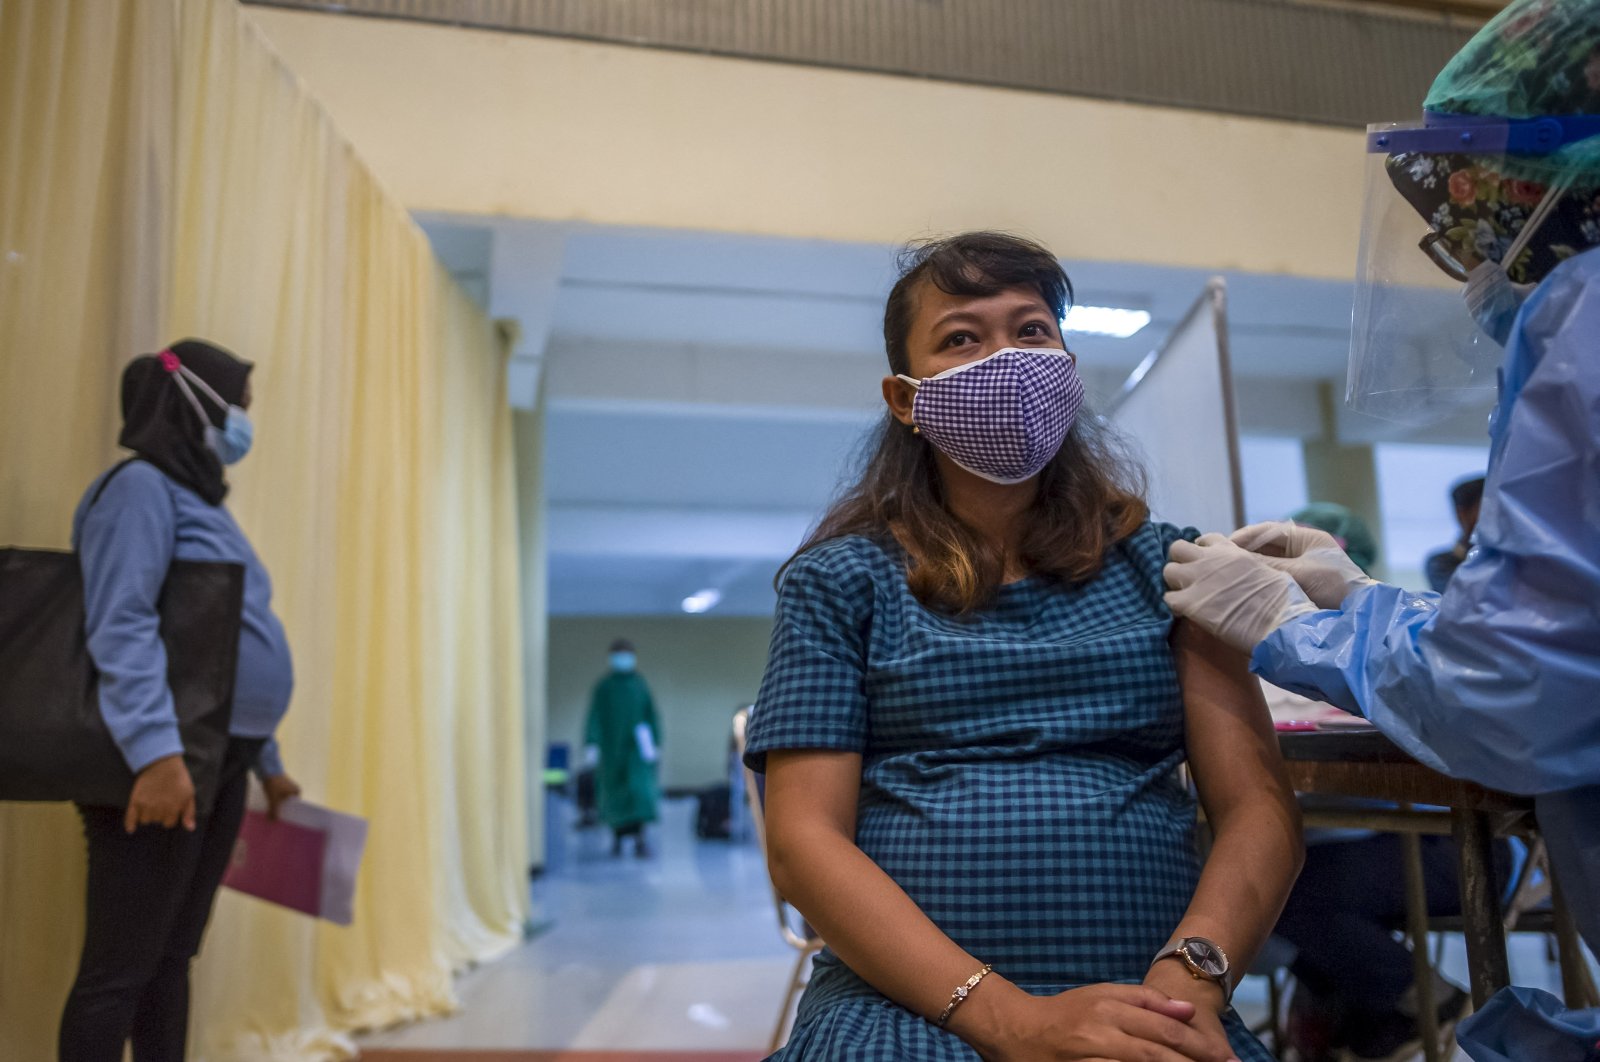 A pregnant woman receives the Sinovac vaccine against Covid-19 coronavirus in Surabaya, on August 19, 2021, during an accelerated vaccination program including pregnant women. (AFP Photo)